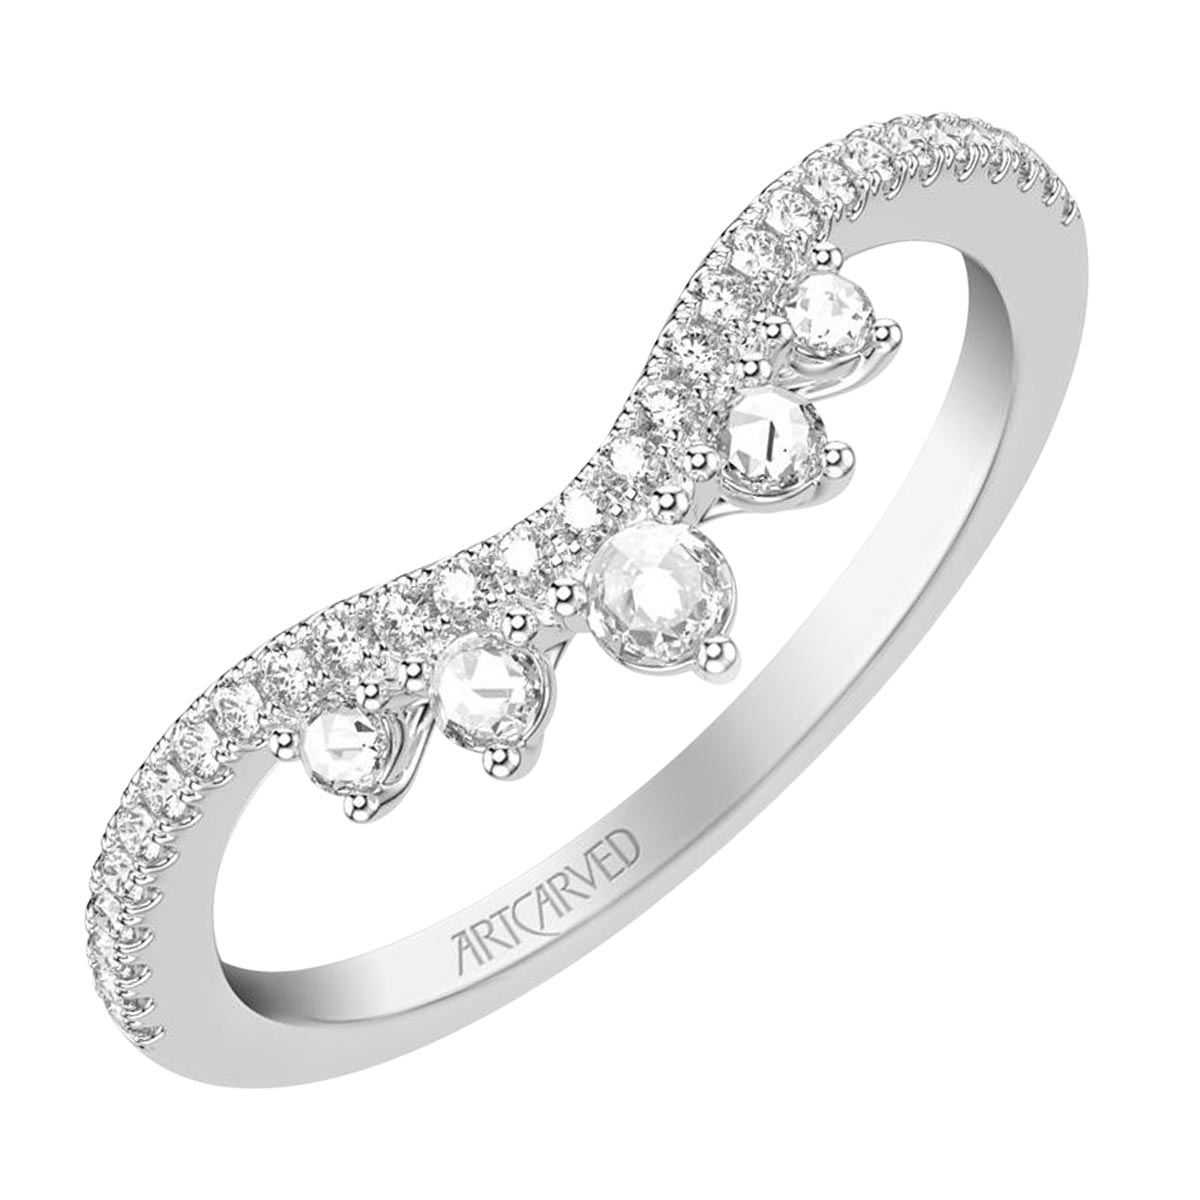 Artcarved Contemporary Rose Cut Diamond Curved Wedding Band in 14kt White Gold (1/4ct tw)